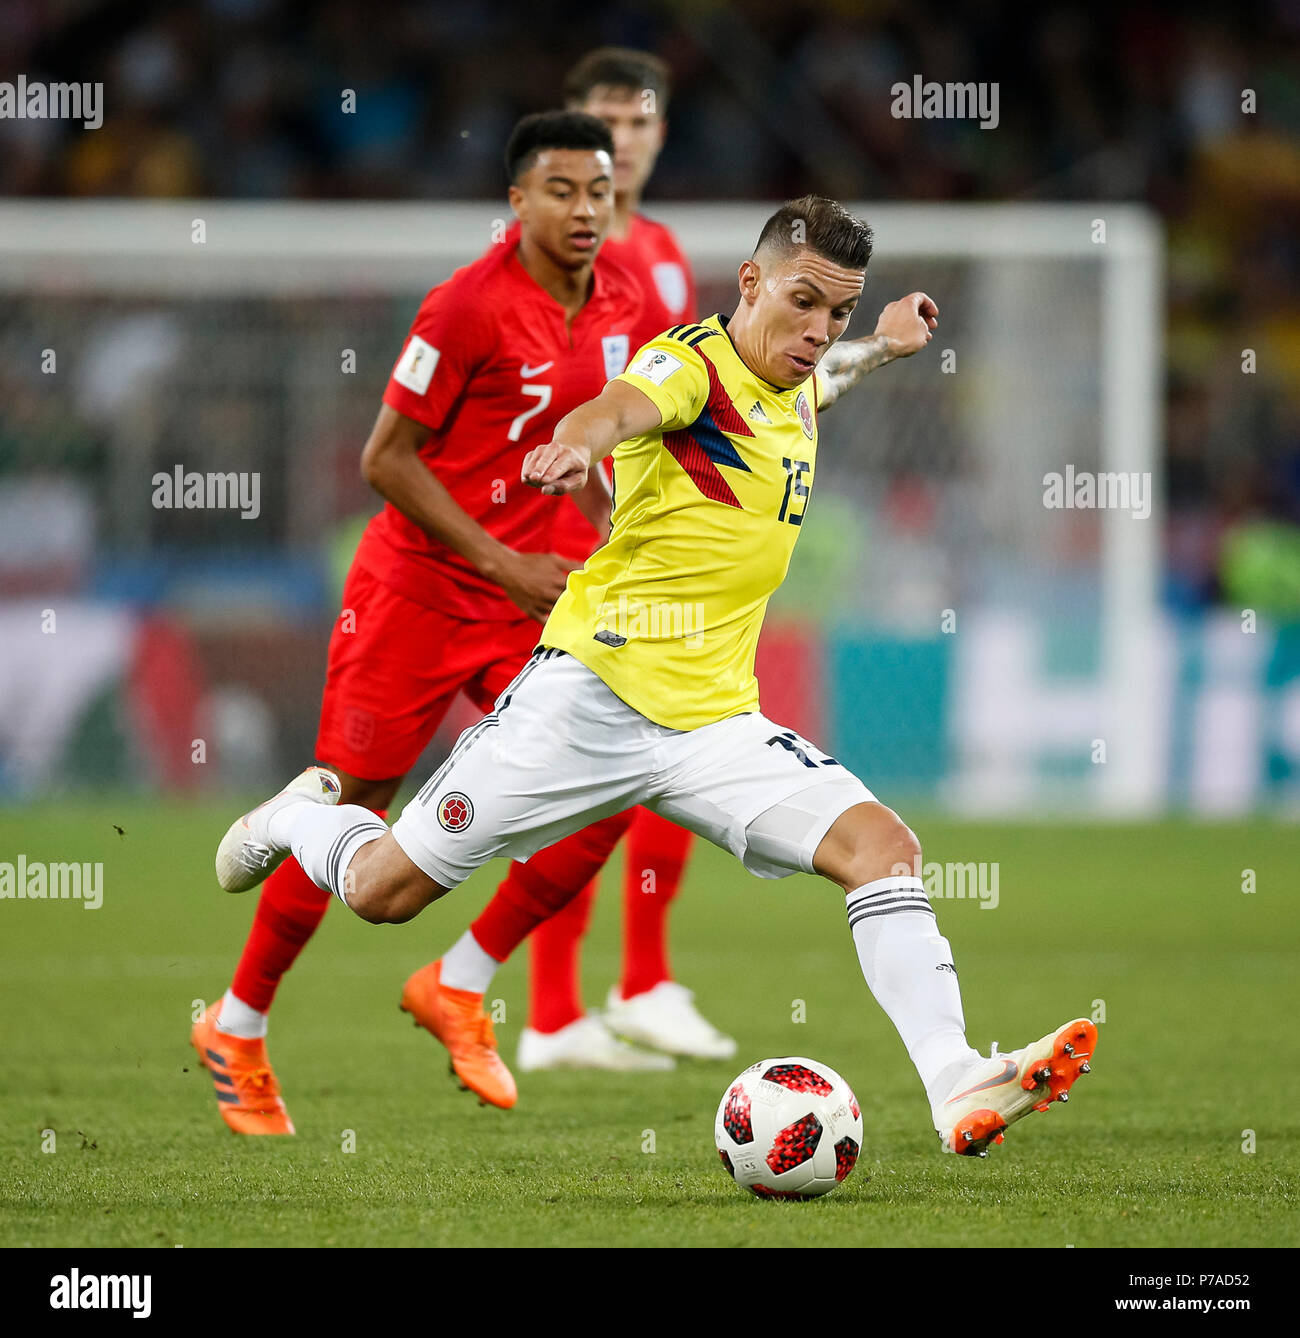 Moscow, Russia. 3rd July, 2018. Mateus Uribe of Colombia during the 2018 FIFA World Cup Round of 16 match between Colombia and England at Spartak Stadium on July 3rd 2018 in Moscow, Russia. (Photo by Daniel Chesterton/phcimages.com) Credit: PHC Images/Alamy Live News Stock Photo